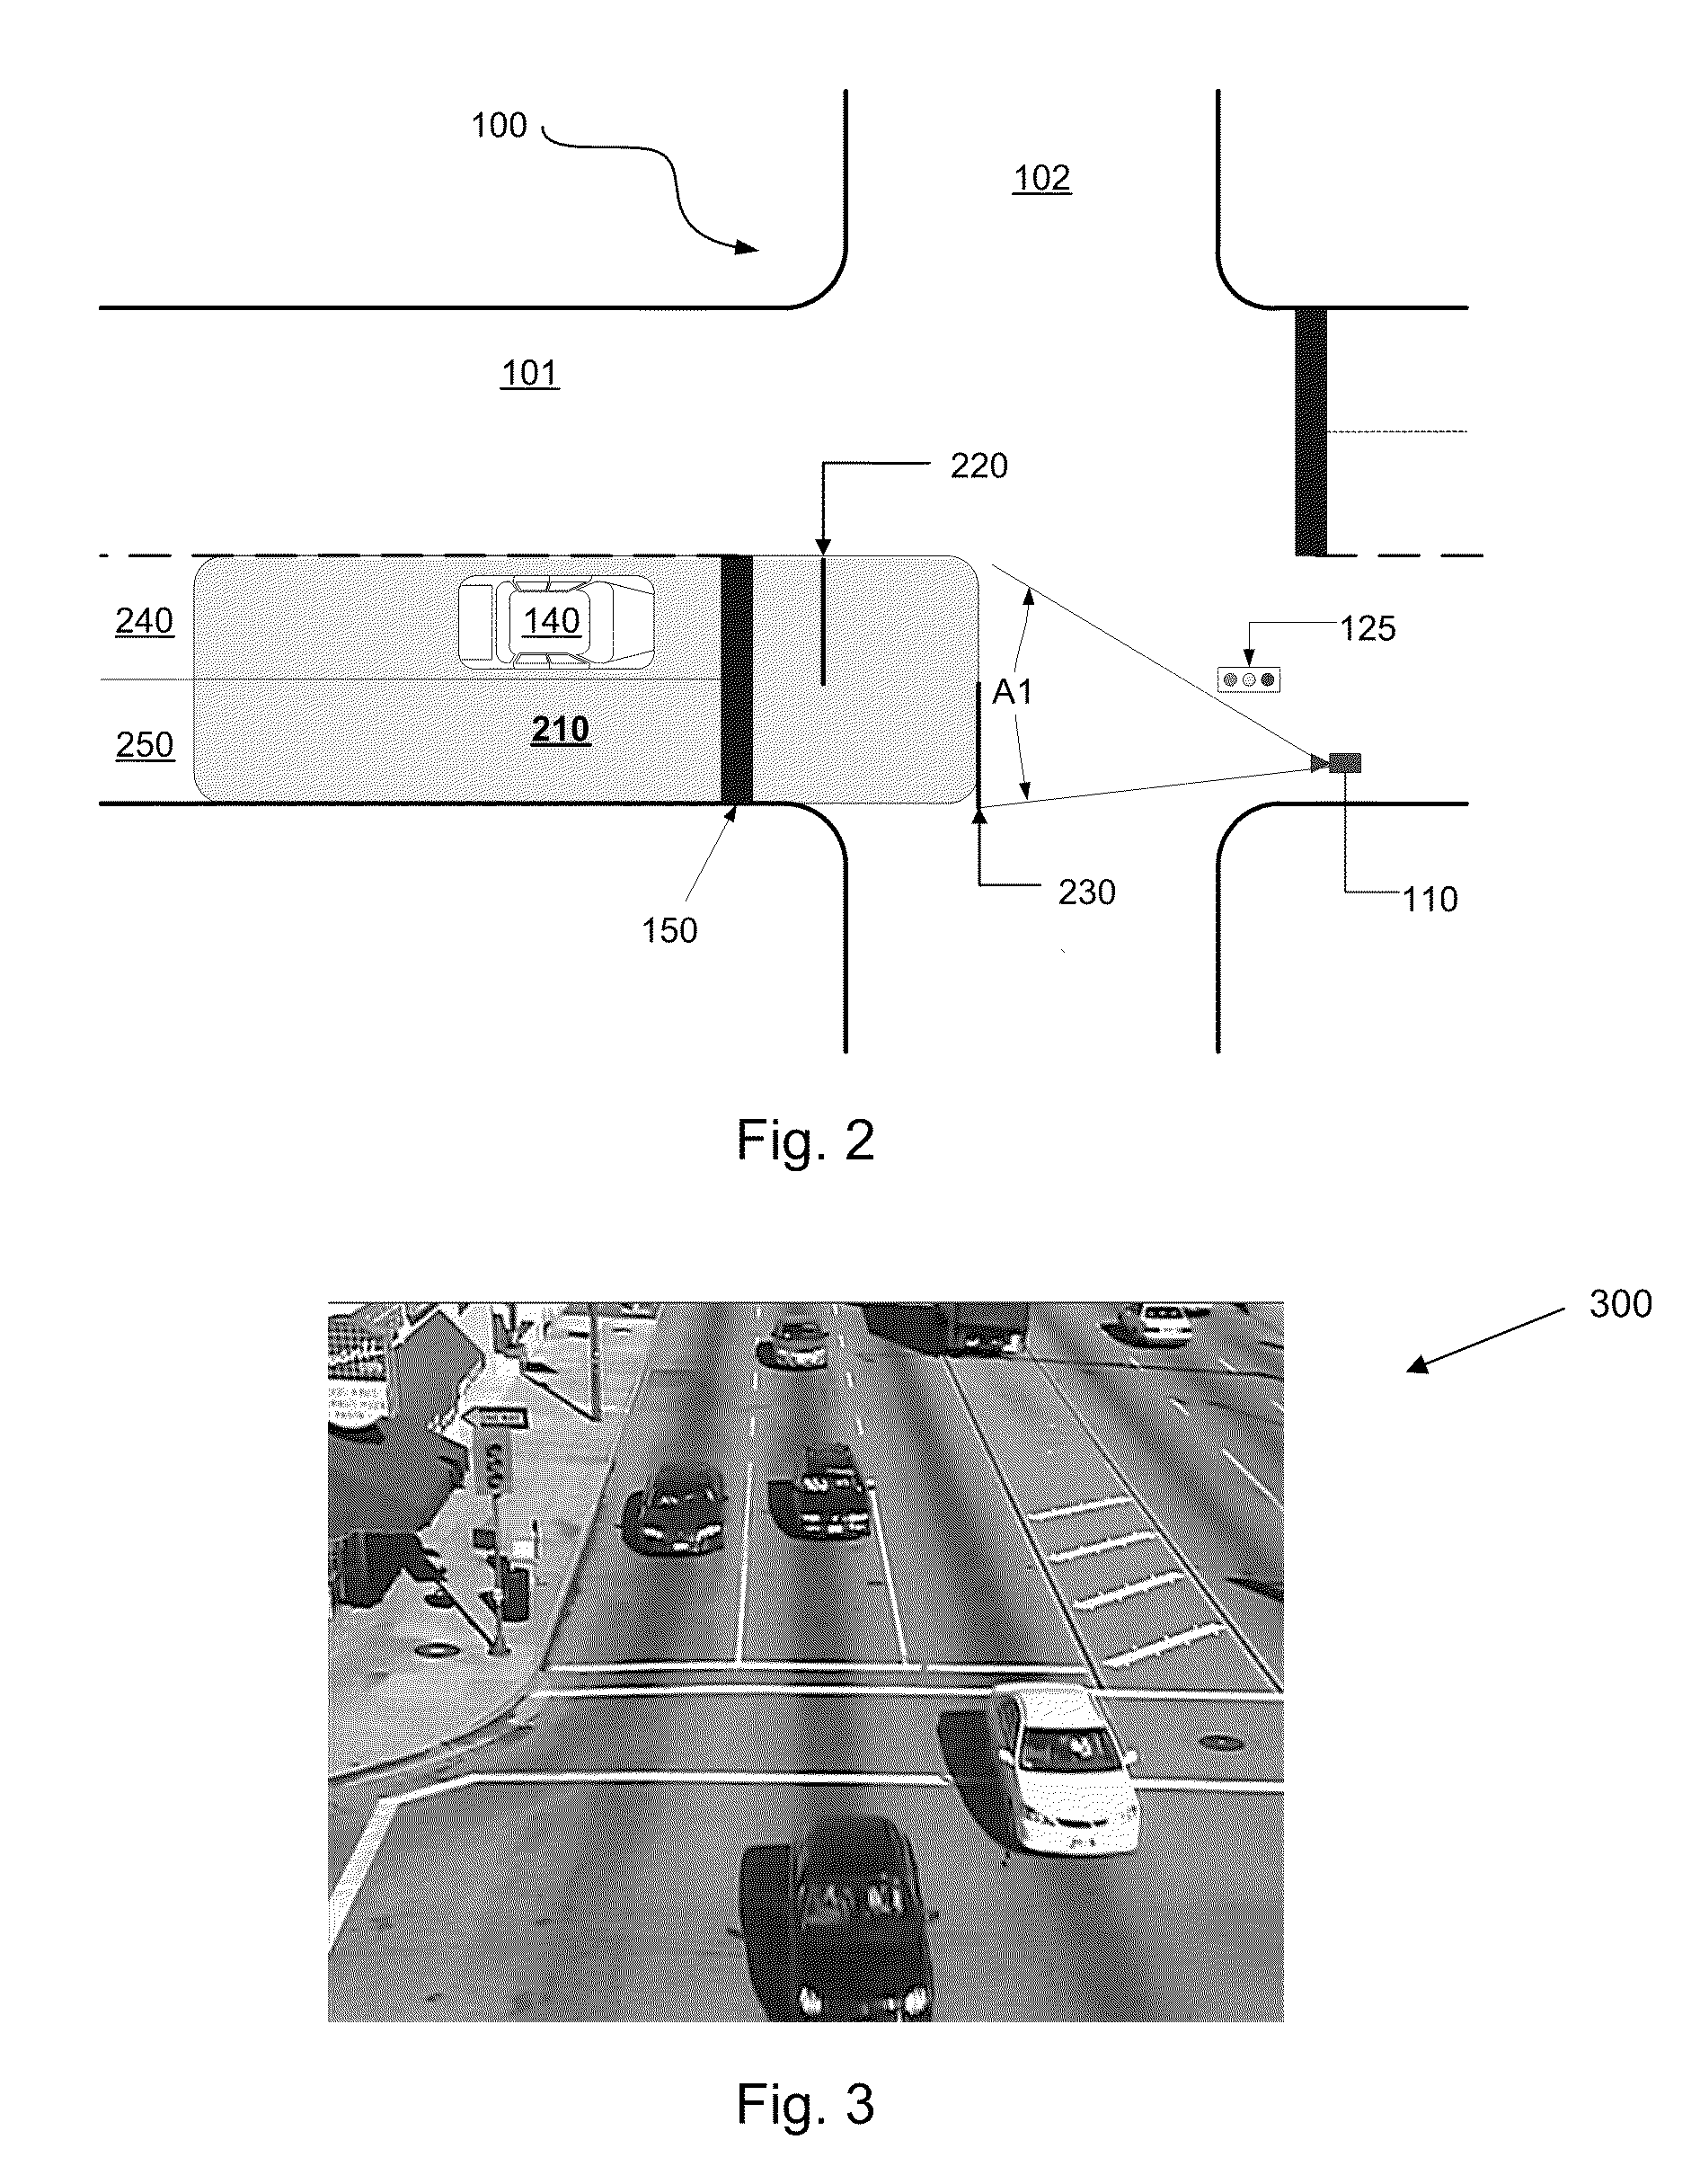 System and method for video signal sensing using traffic enforcement cameras